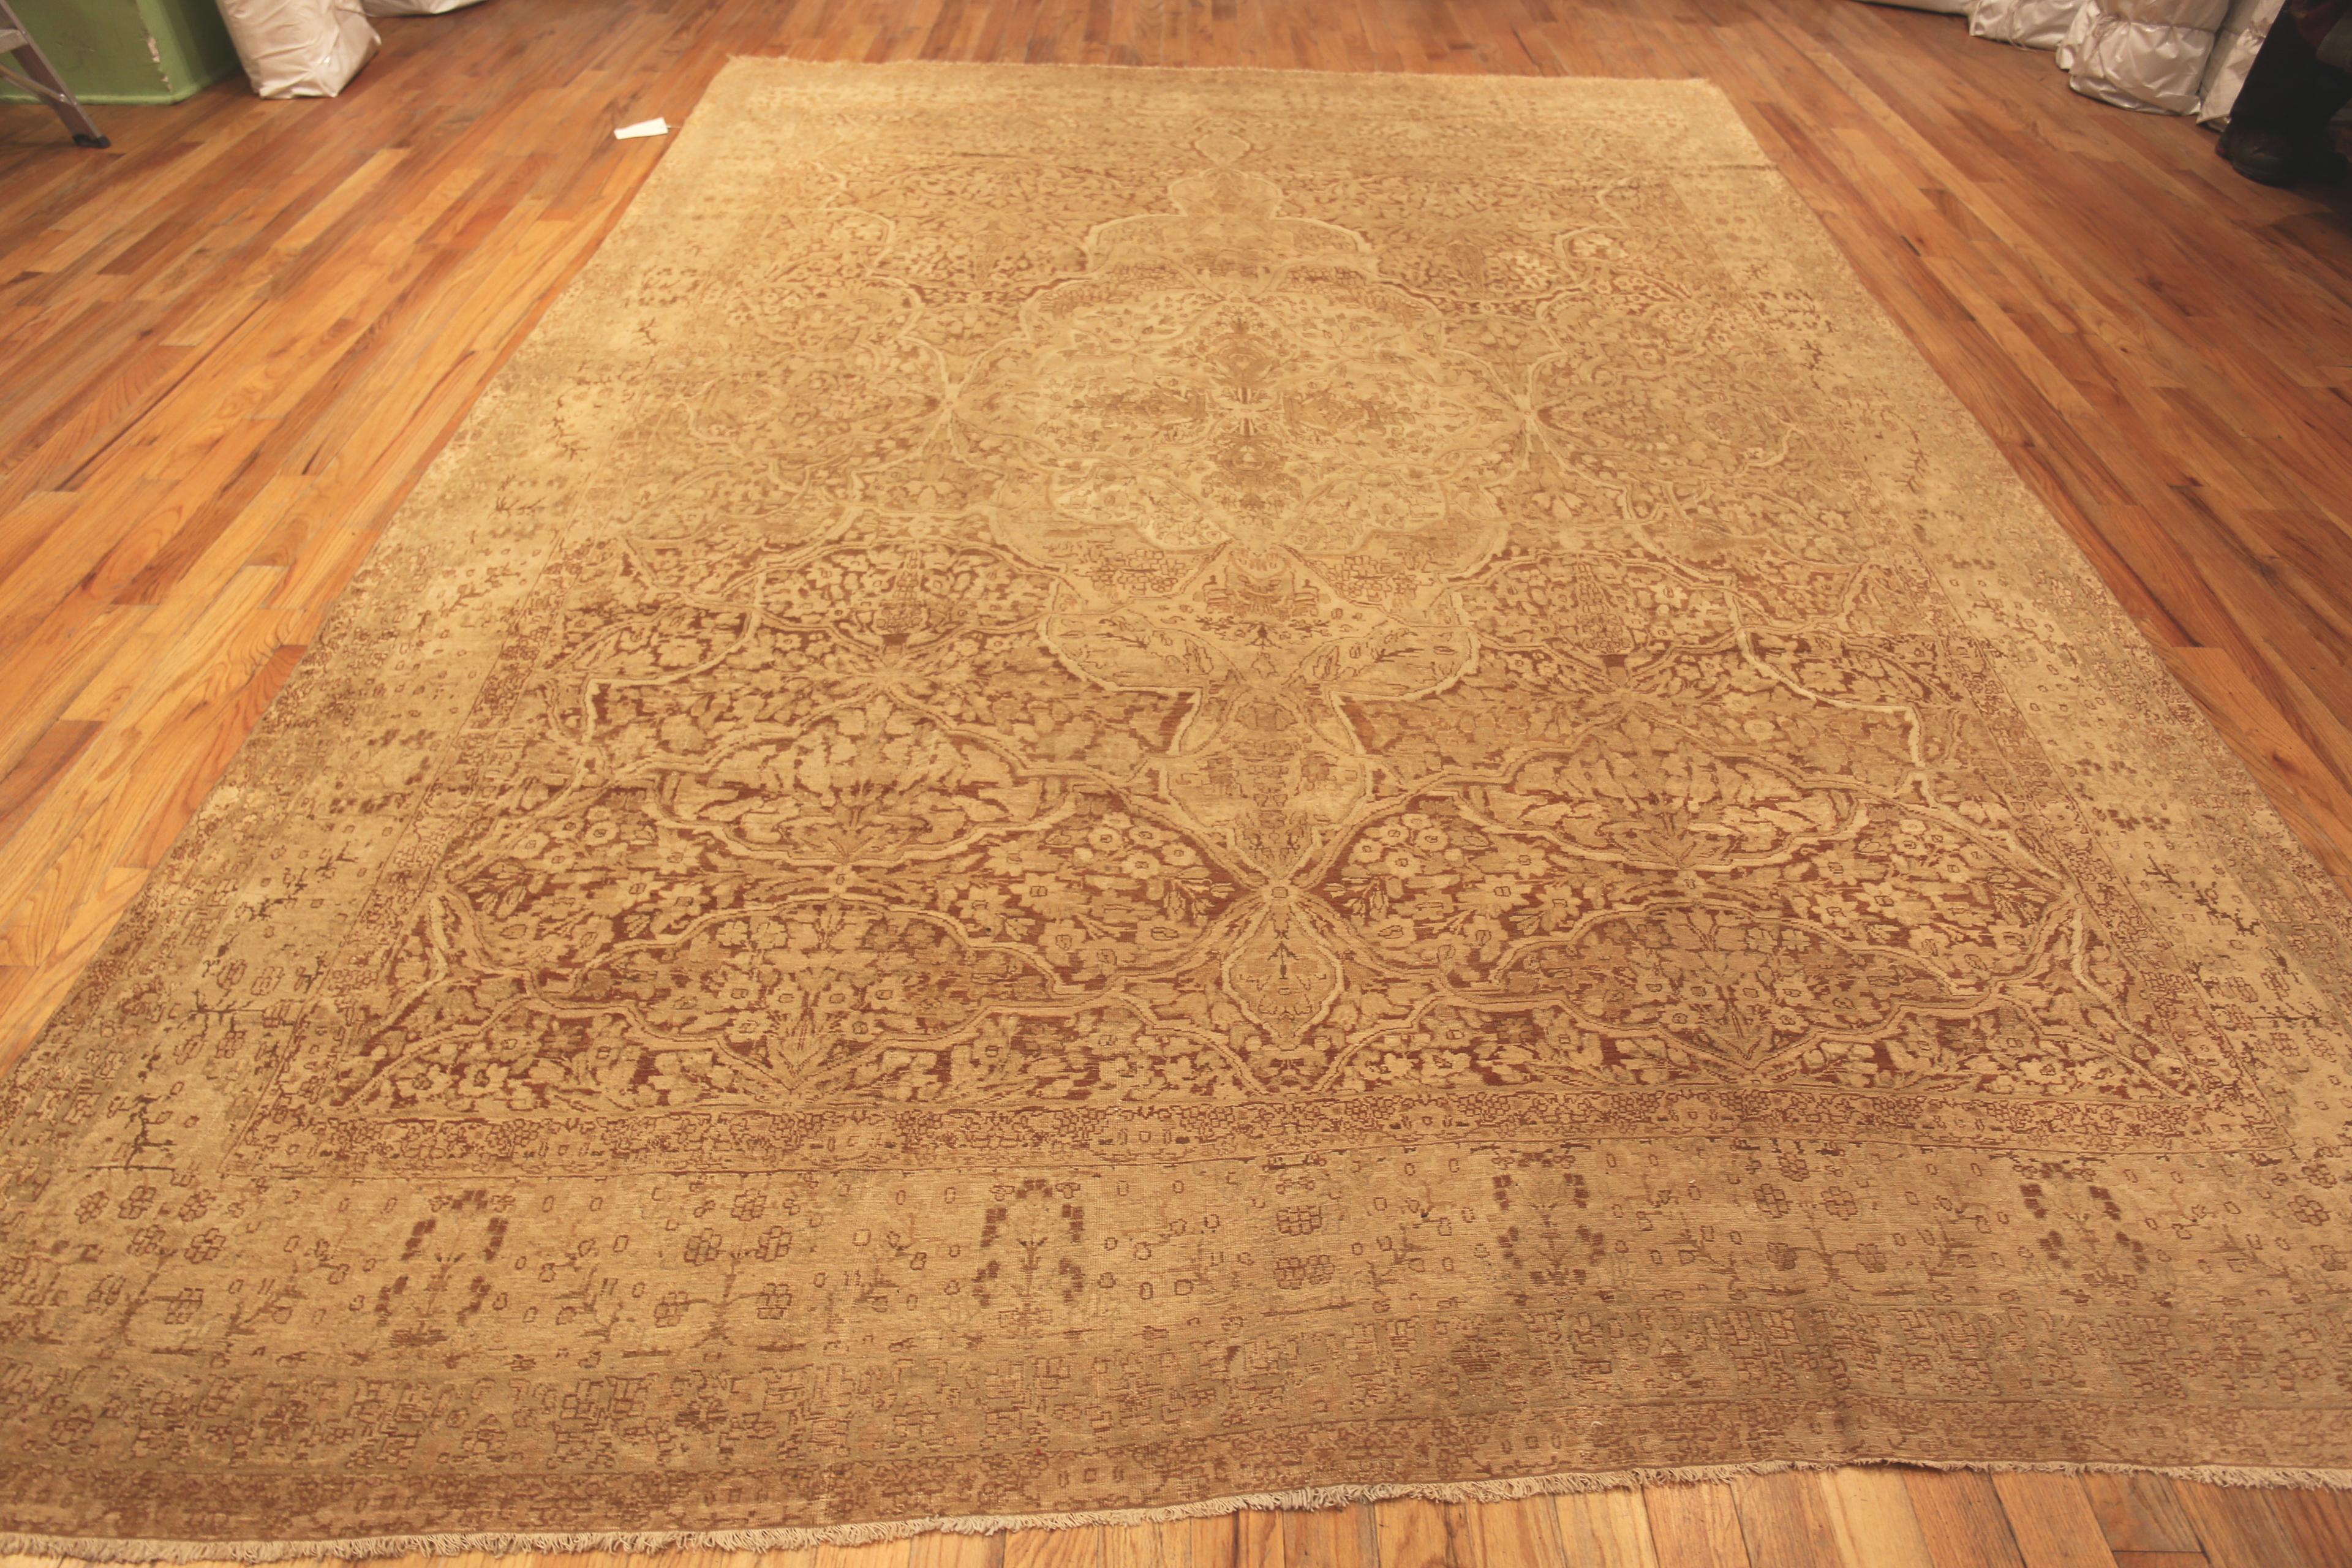 Beautiful Fine Neutral Earthy Traditional Antique Decorative Persian Kerman Rug, Country of origin: Persia, Circa date: 1910. Size: 9 ft 7 in x 14 ft 2 in (2.92 m x 4.32 m).